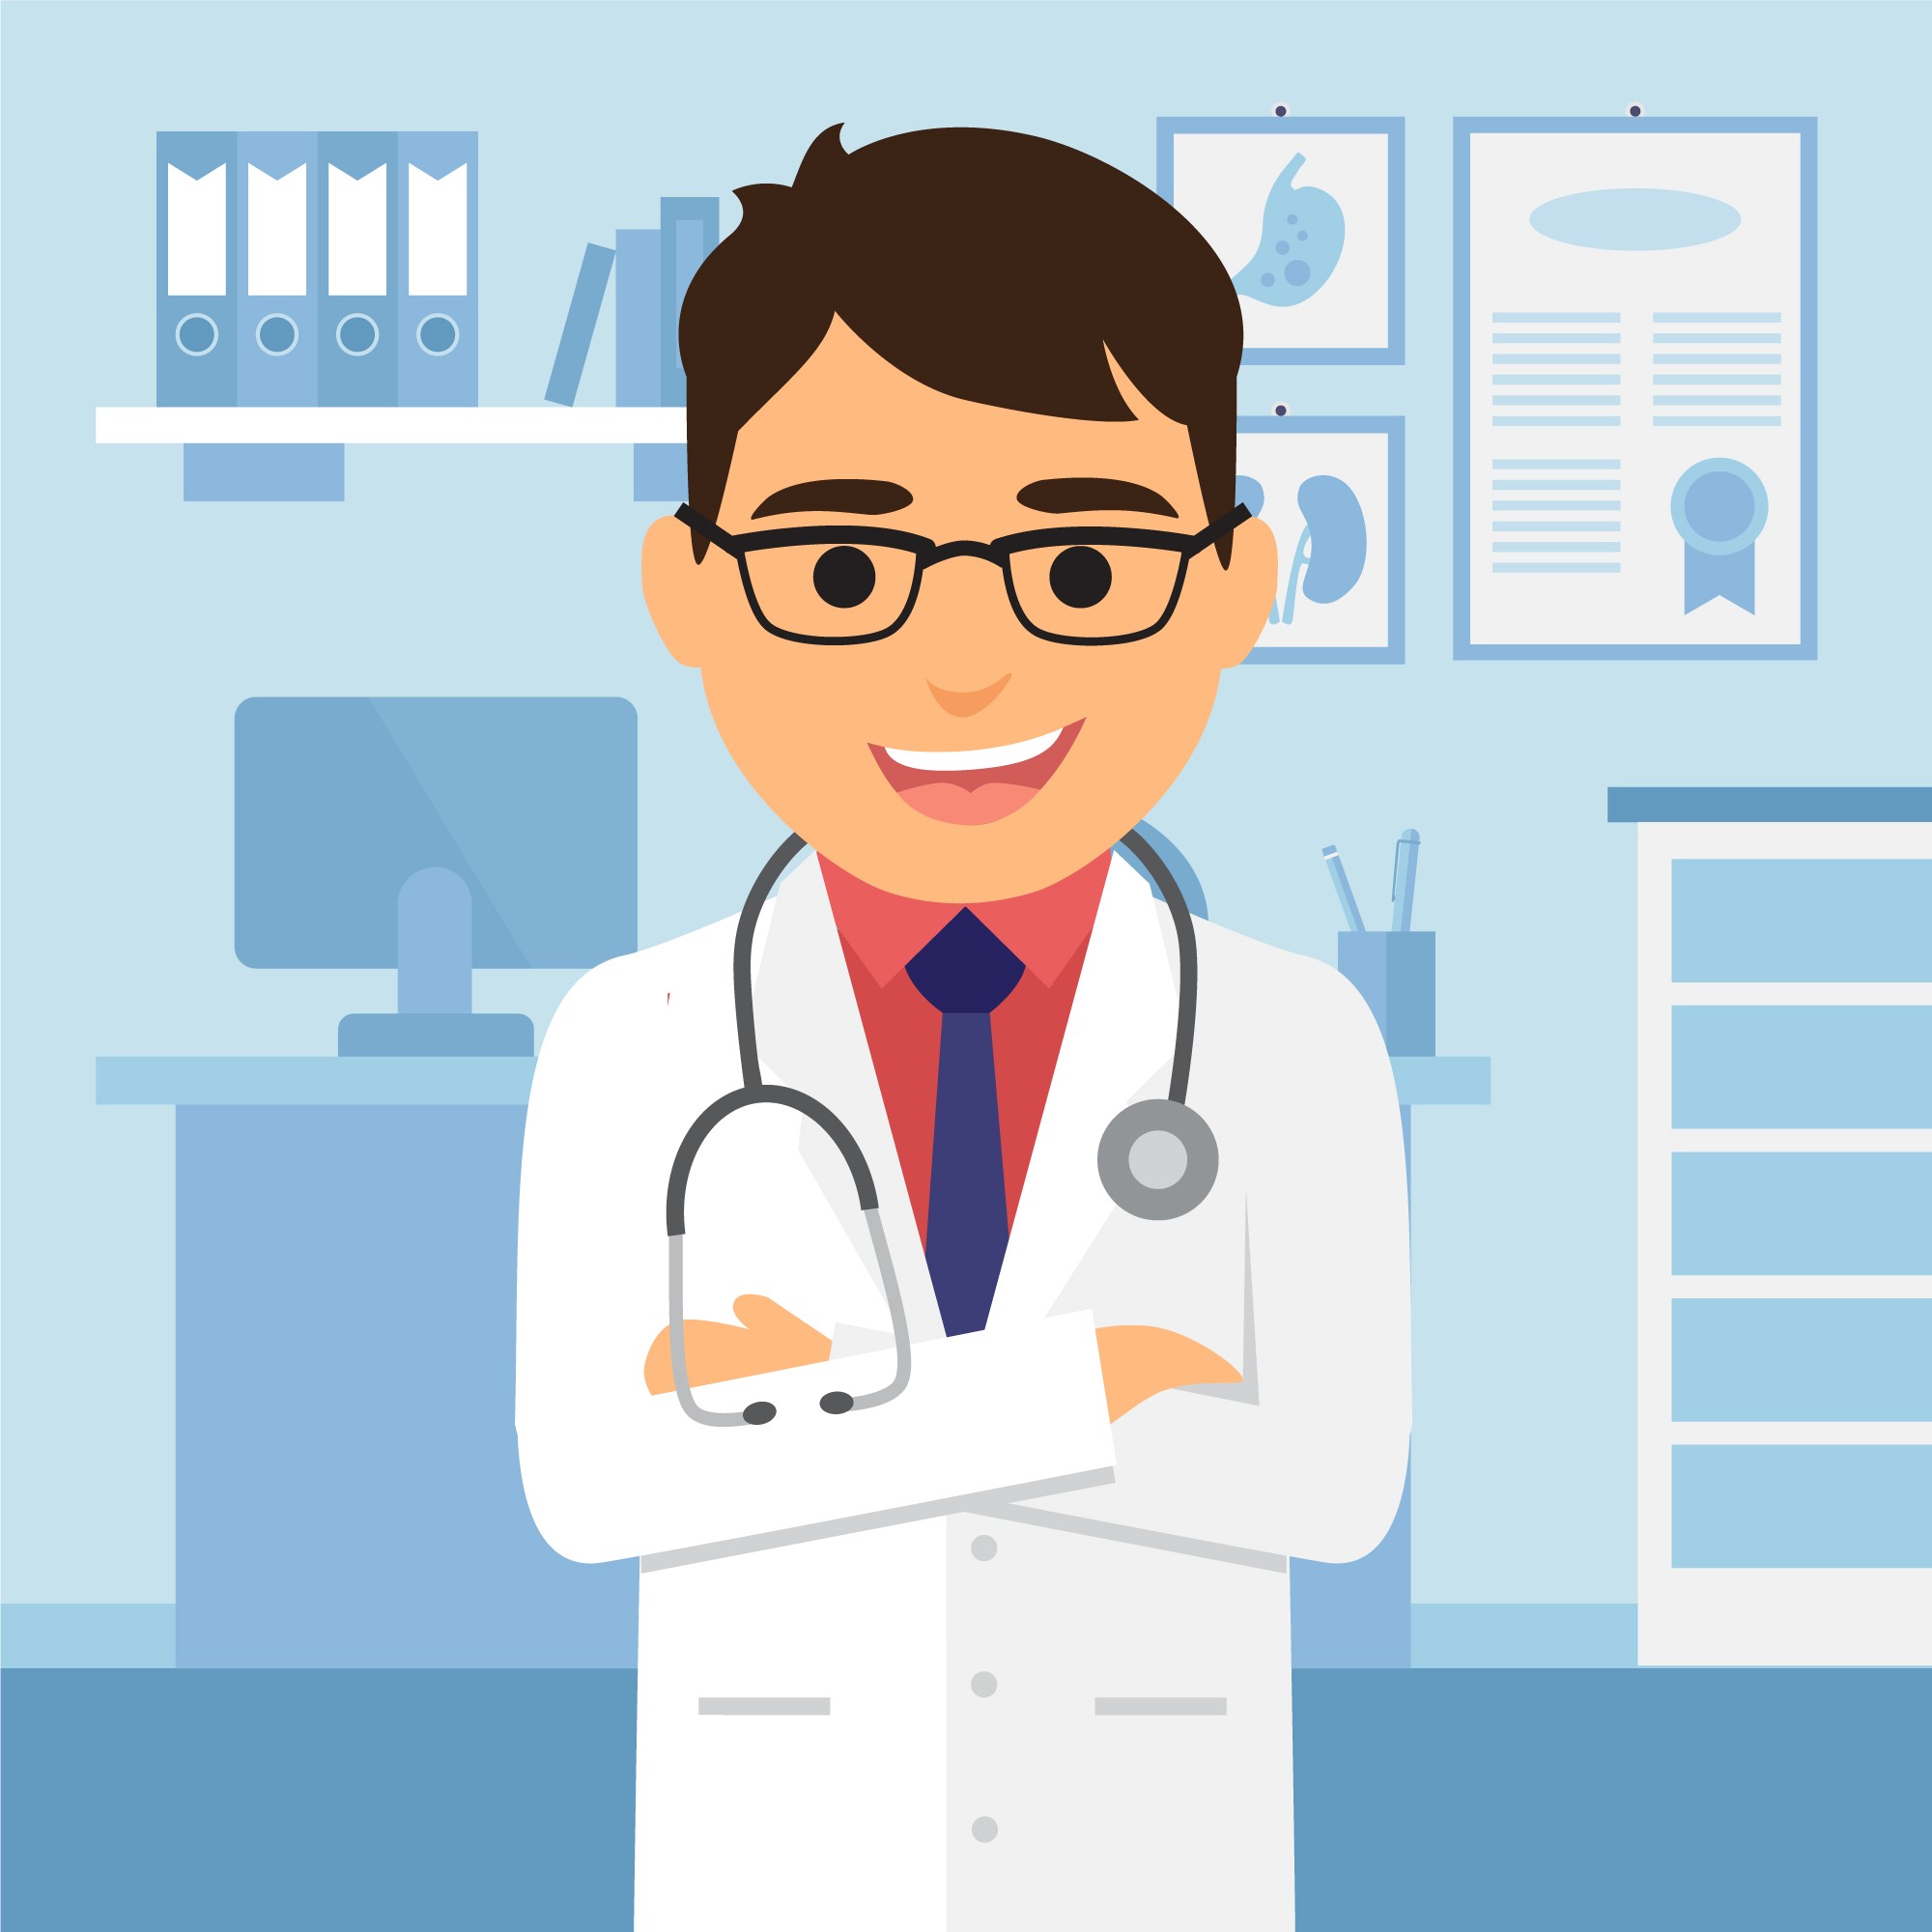 What Should You Know About a Gastroenterologist?